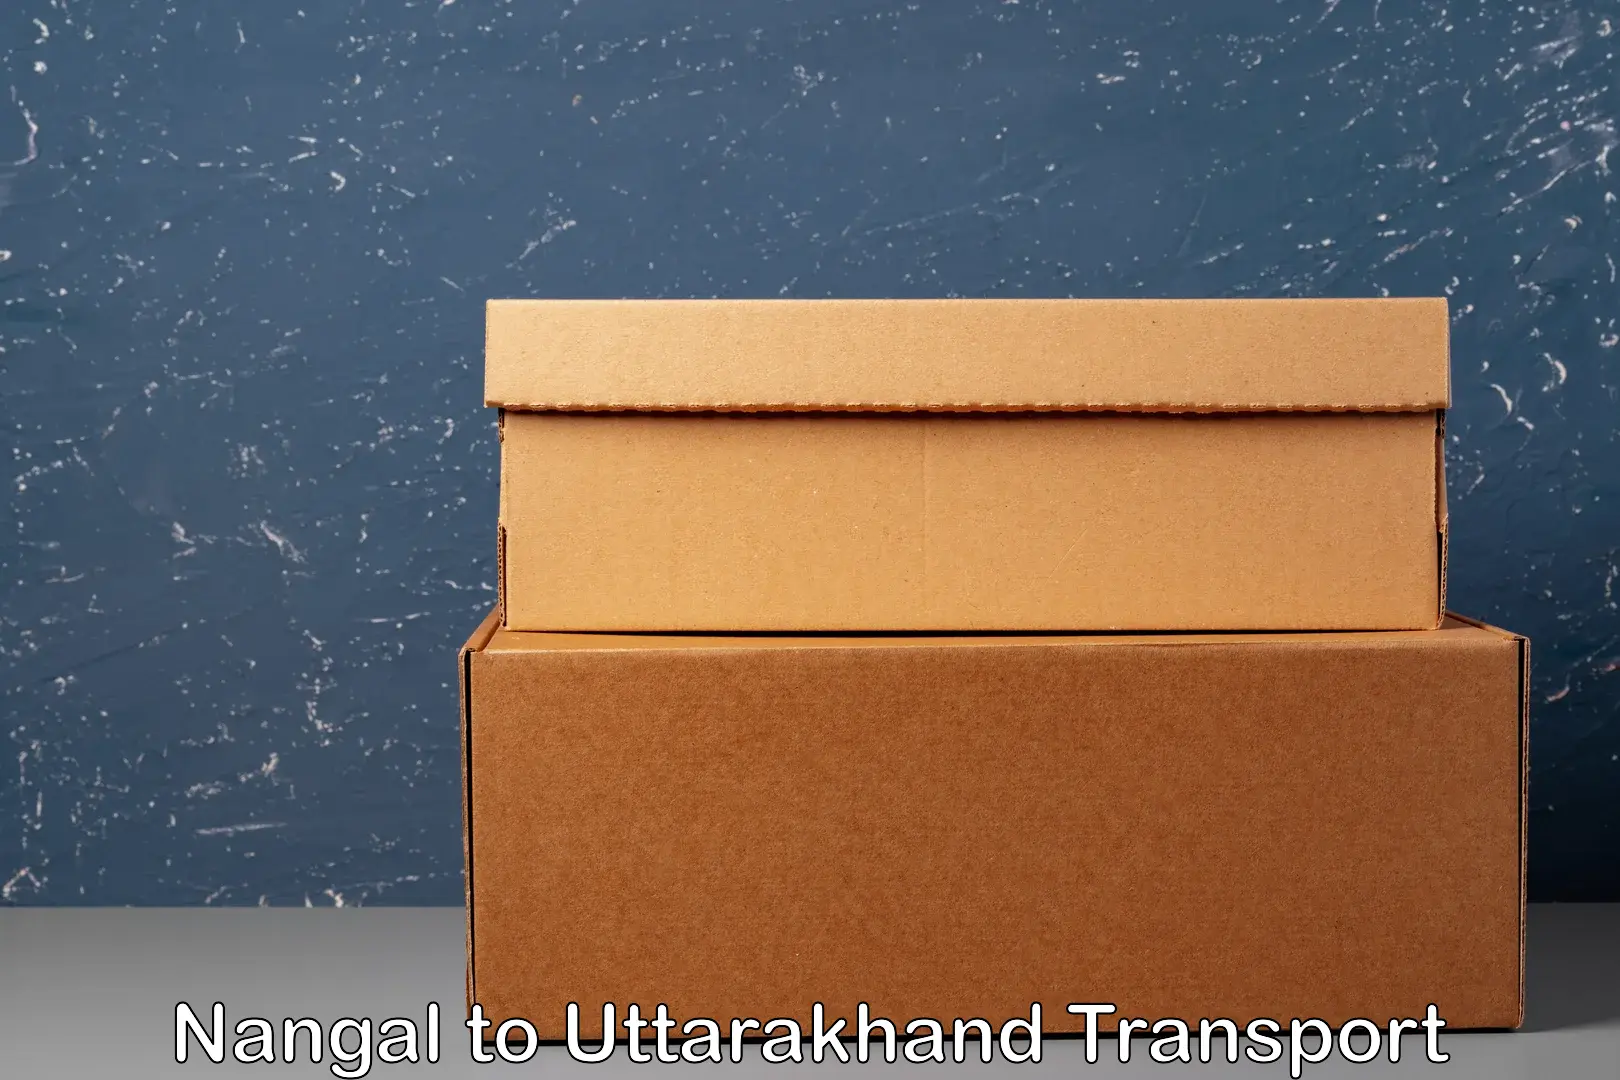 Luggage transport services in Nangal to Rishikesh